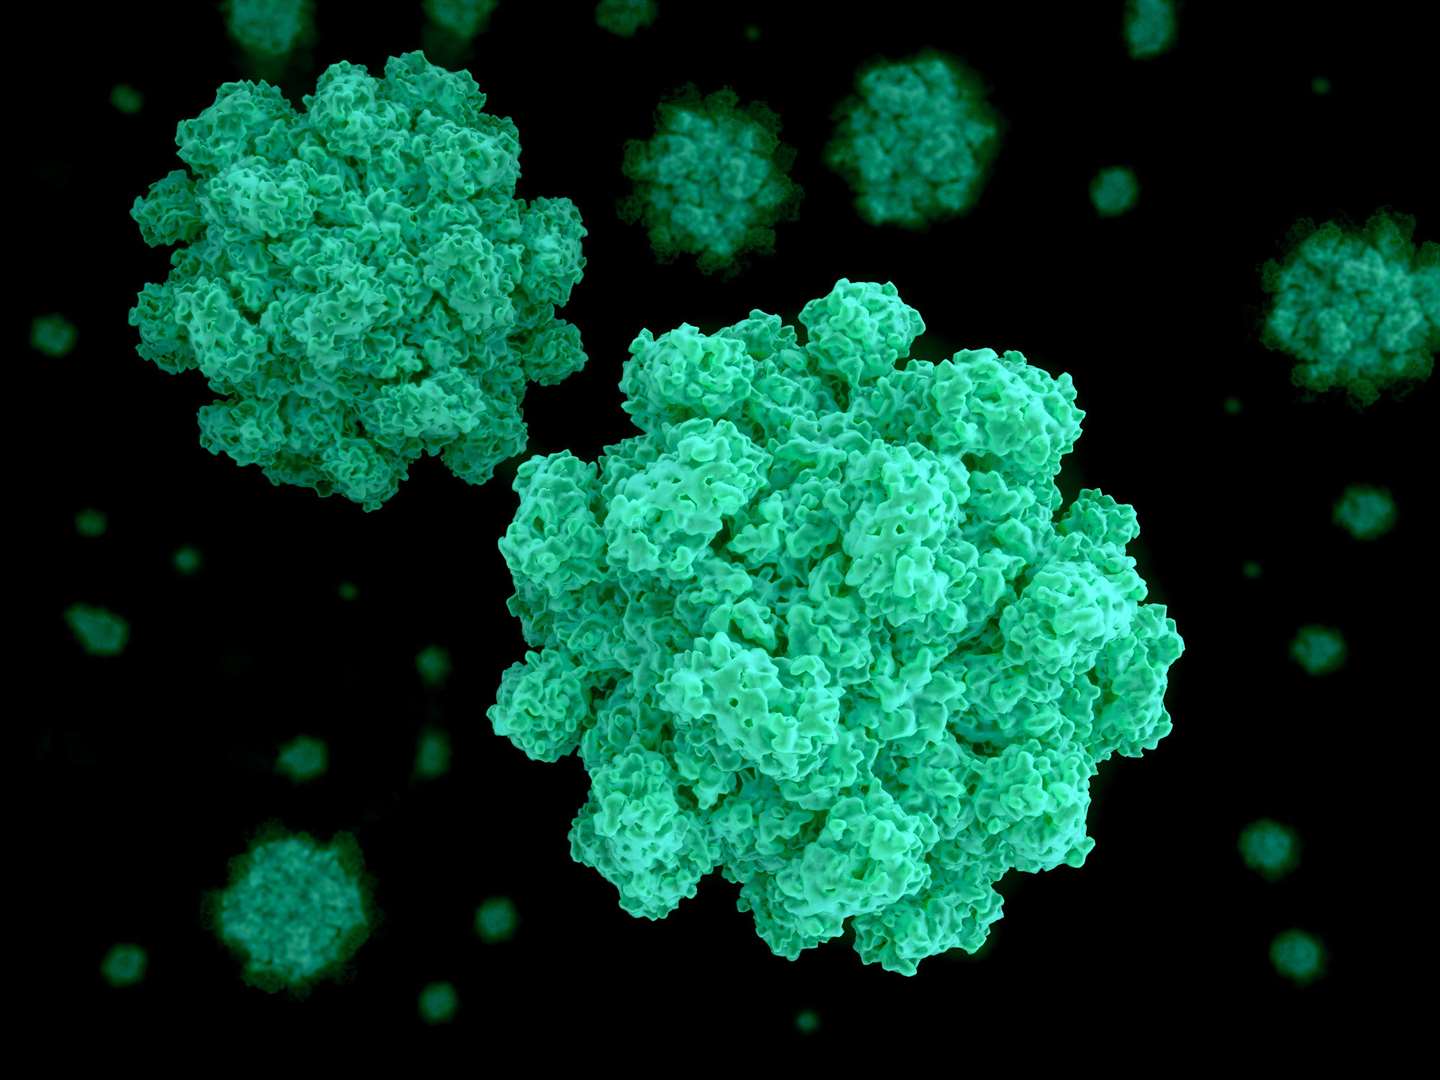 Norovirus was the cause of the illness outbreak